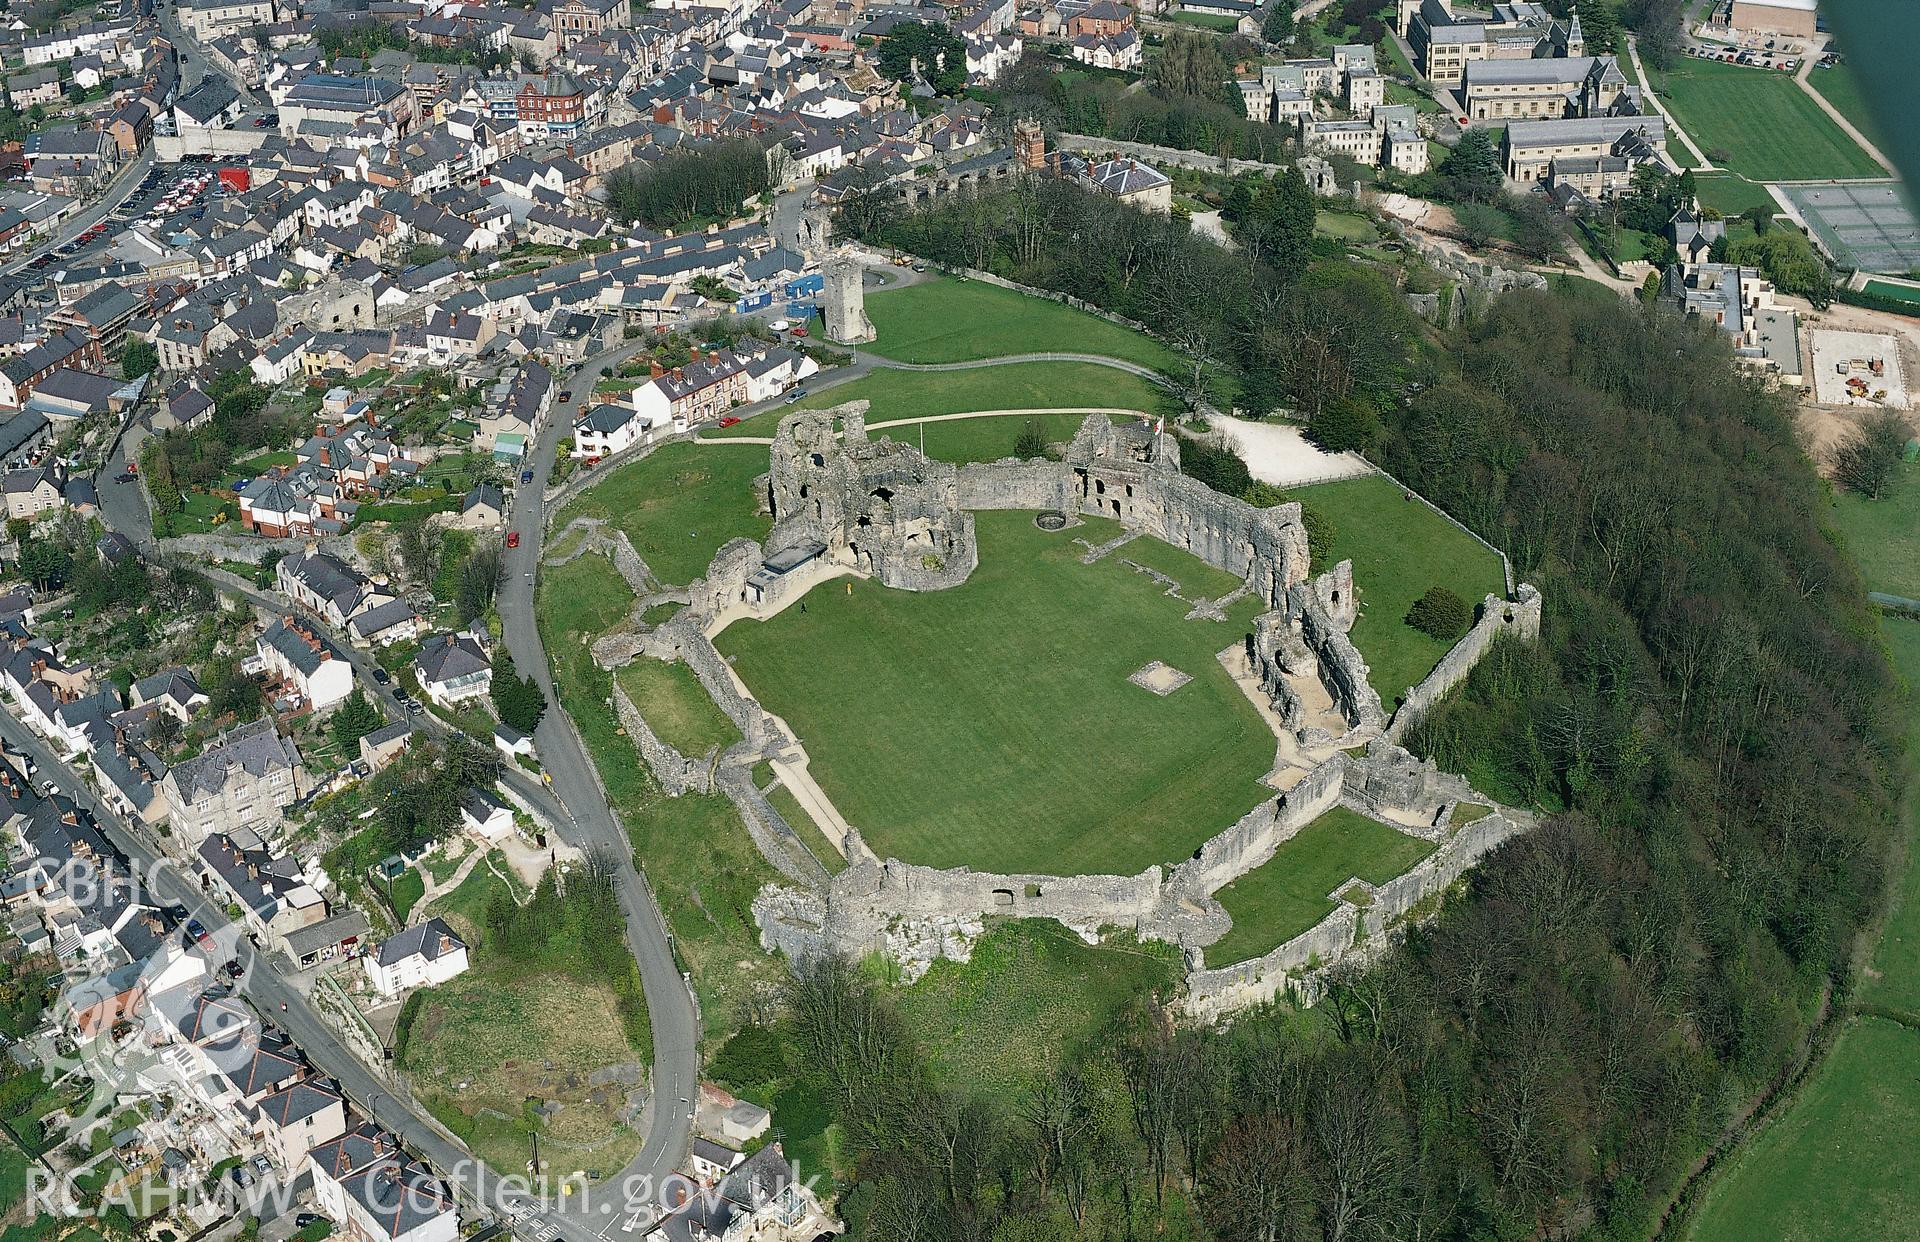 RCAHMW colour oblique aerial photograph of Denbigh, castle and town, from south. Taken by Toby Driver on 08/04/2003.